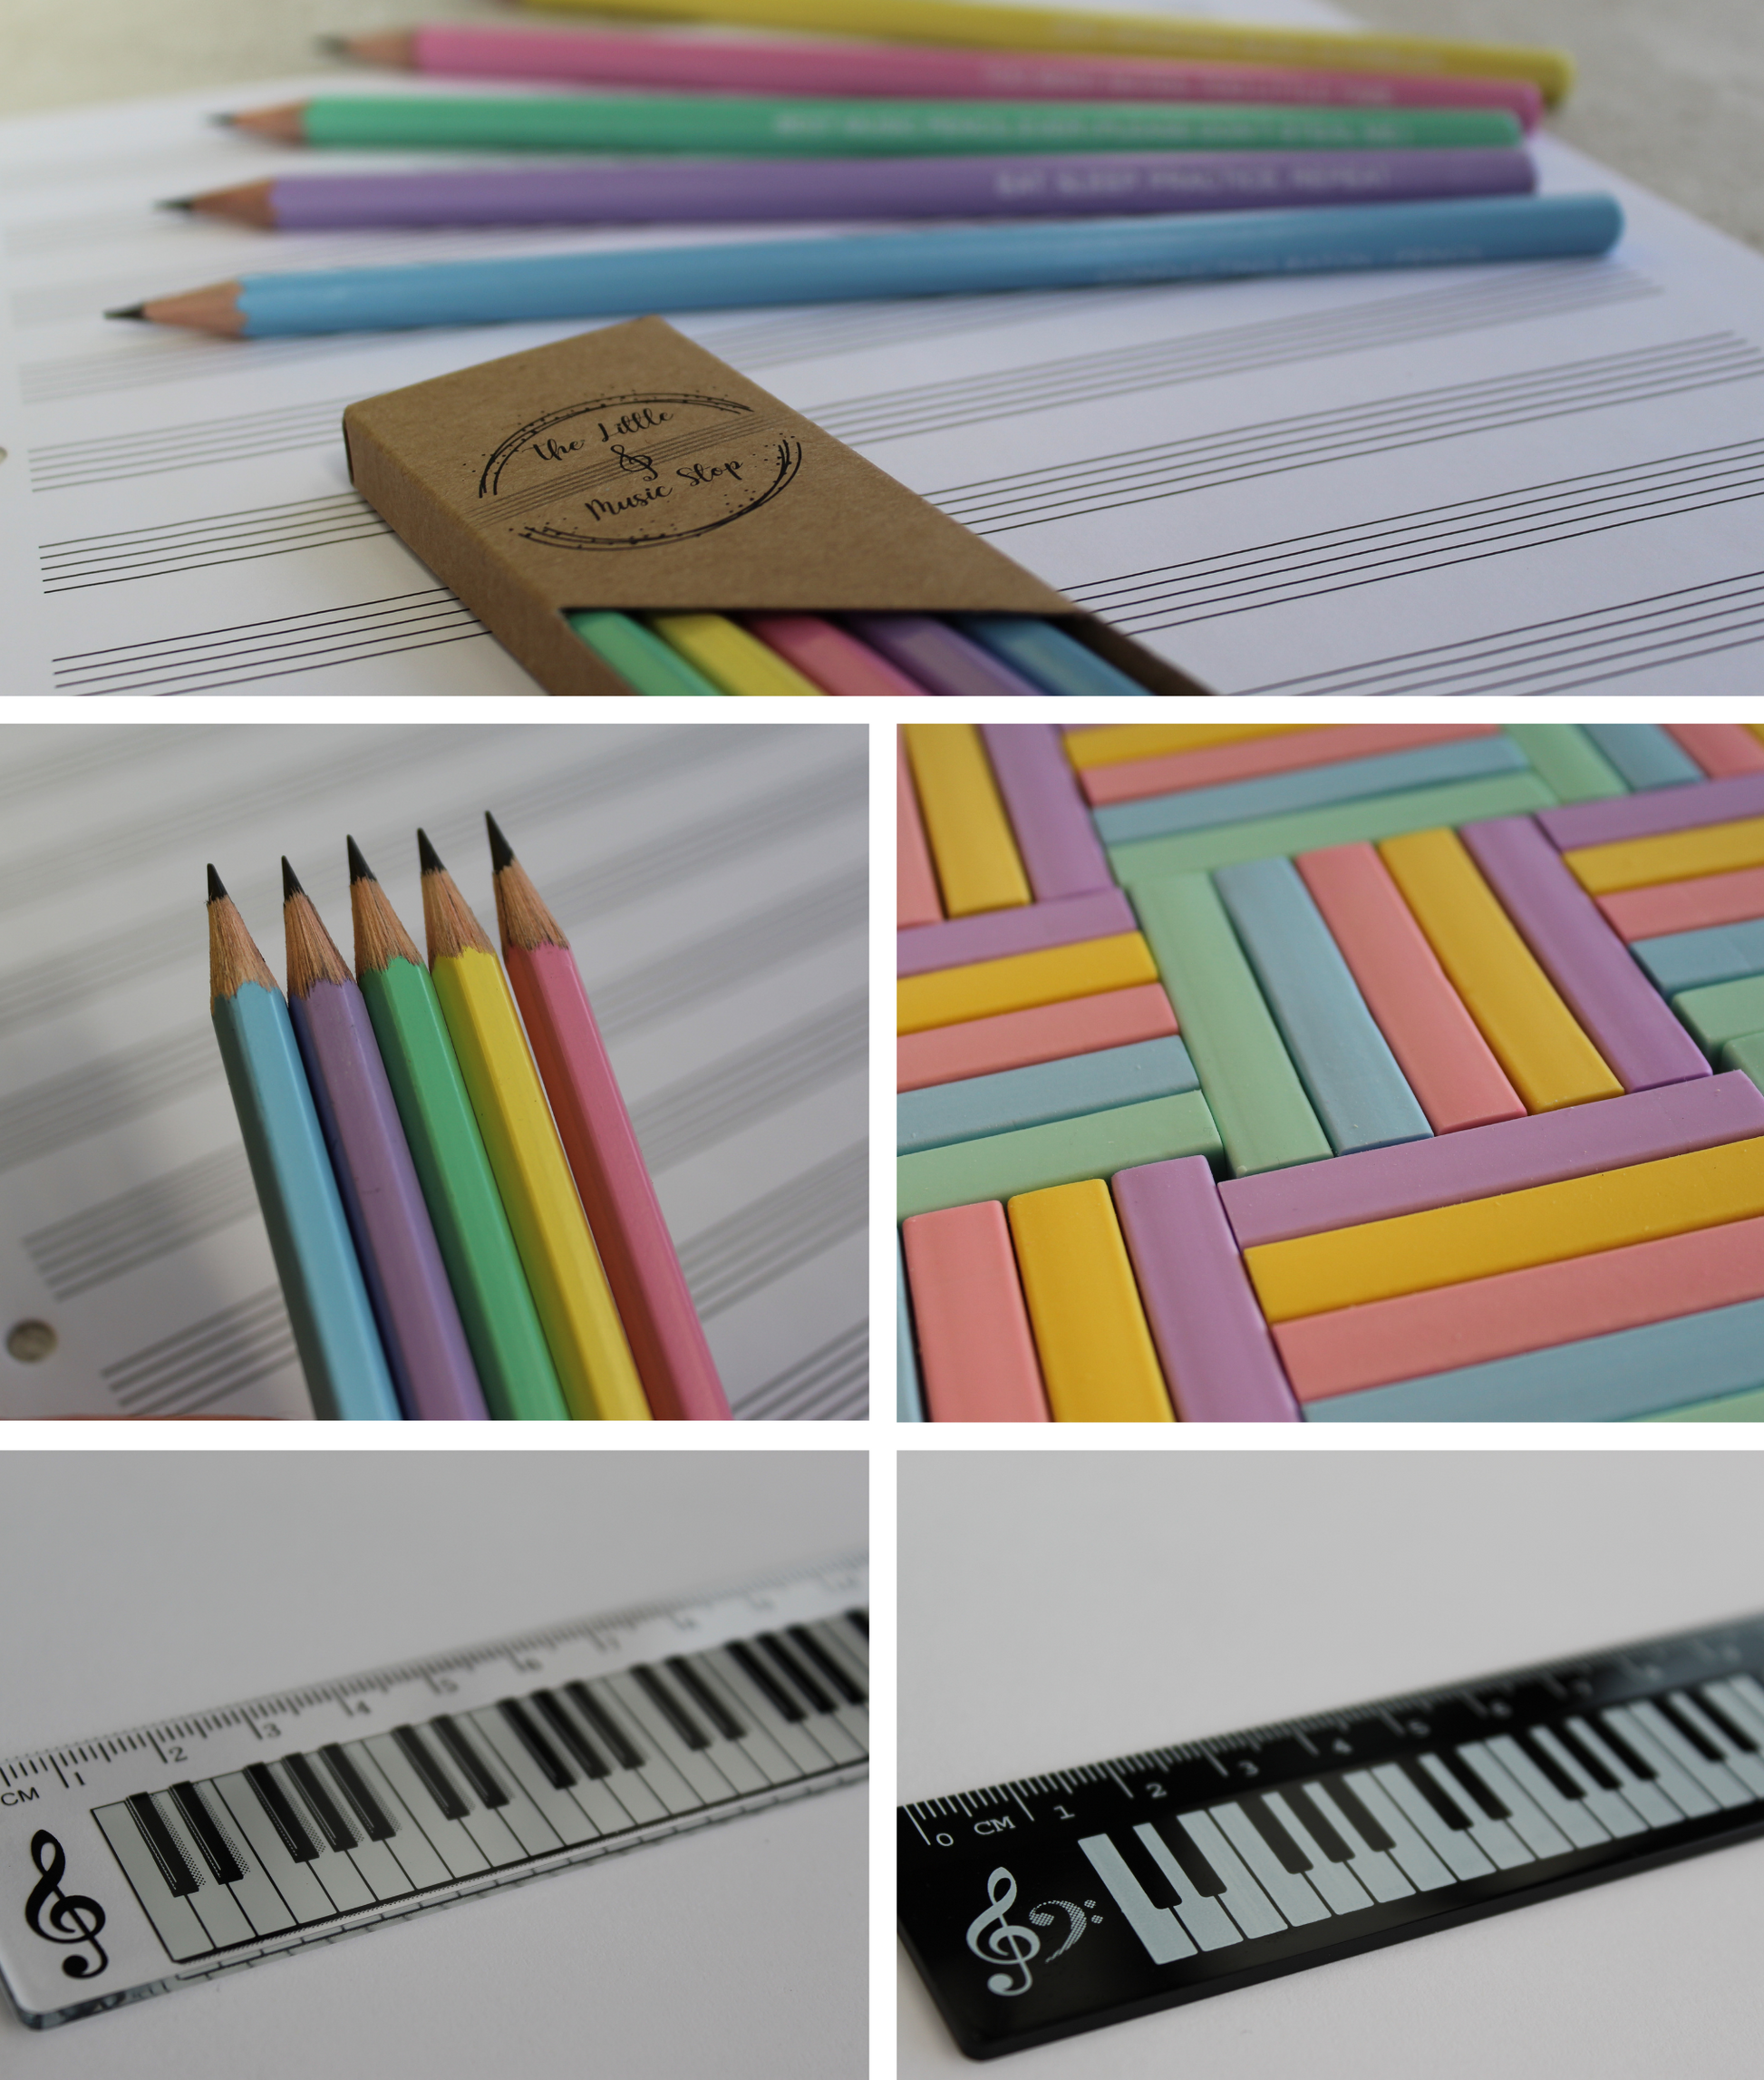 Collage picture of pastel slogan pencils, pastel rubbers in a block design and two rulers in black and clear, both with a piano keyboard design.